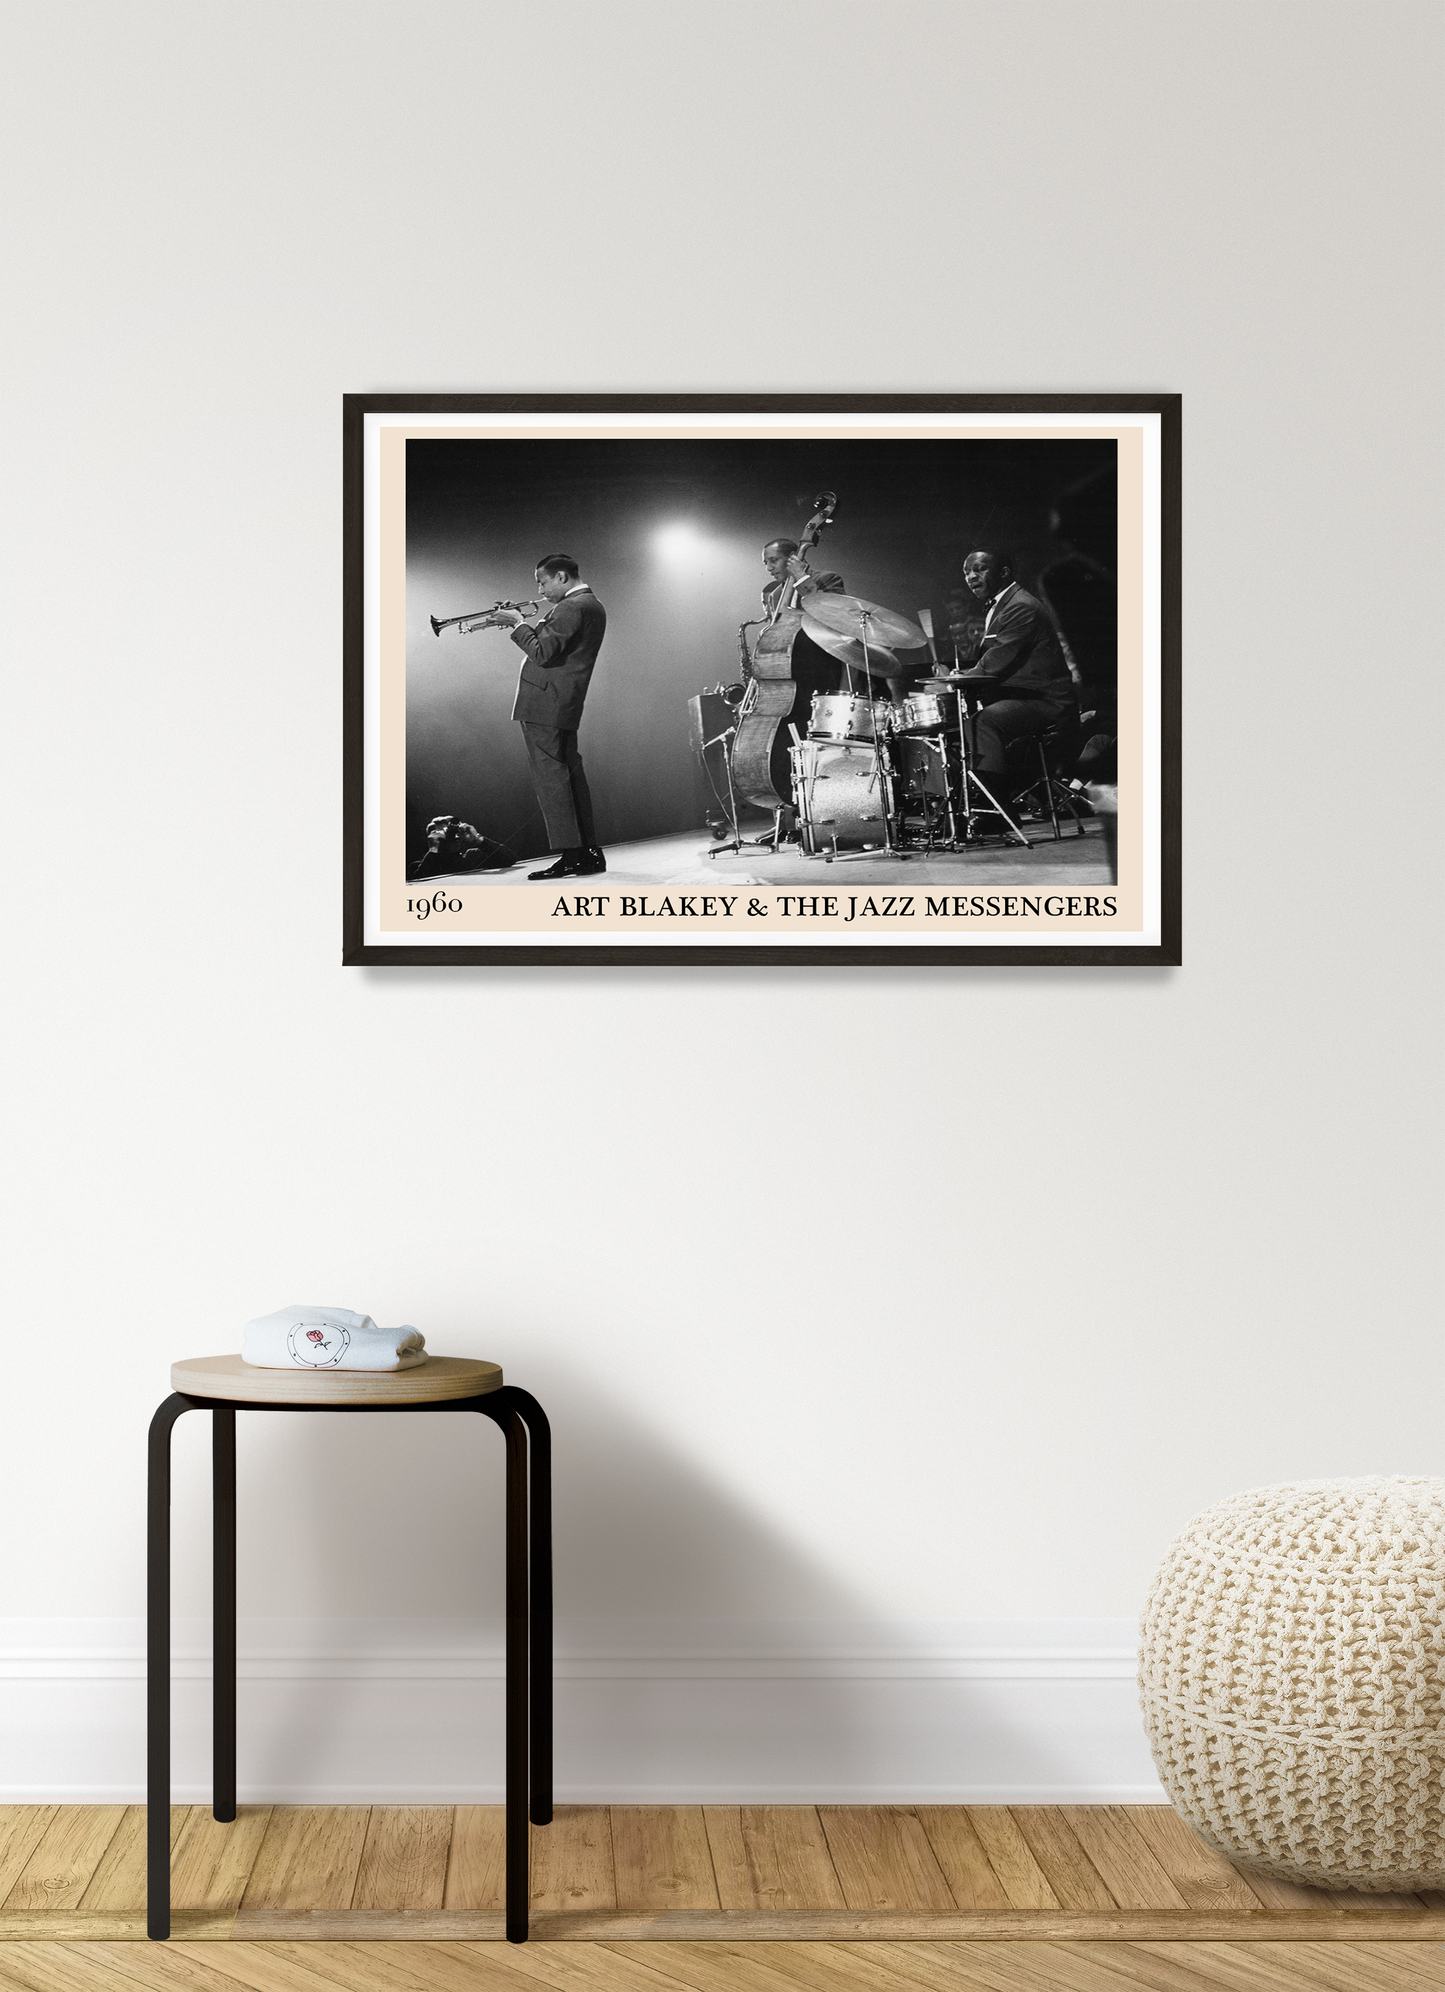 Cool framed music print of Art Blakey & The Jazz Messengers hanging on a white living room wall